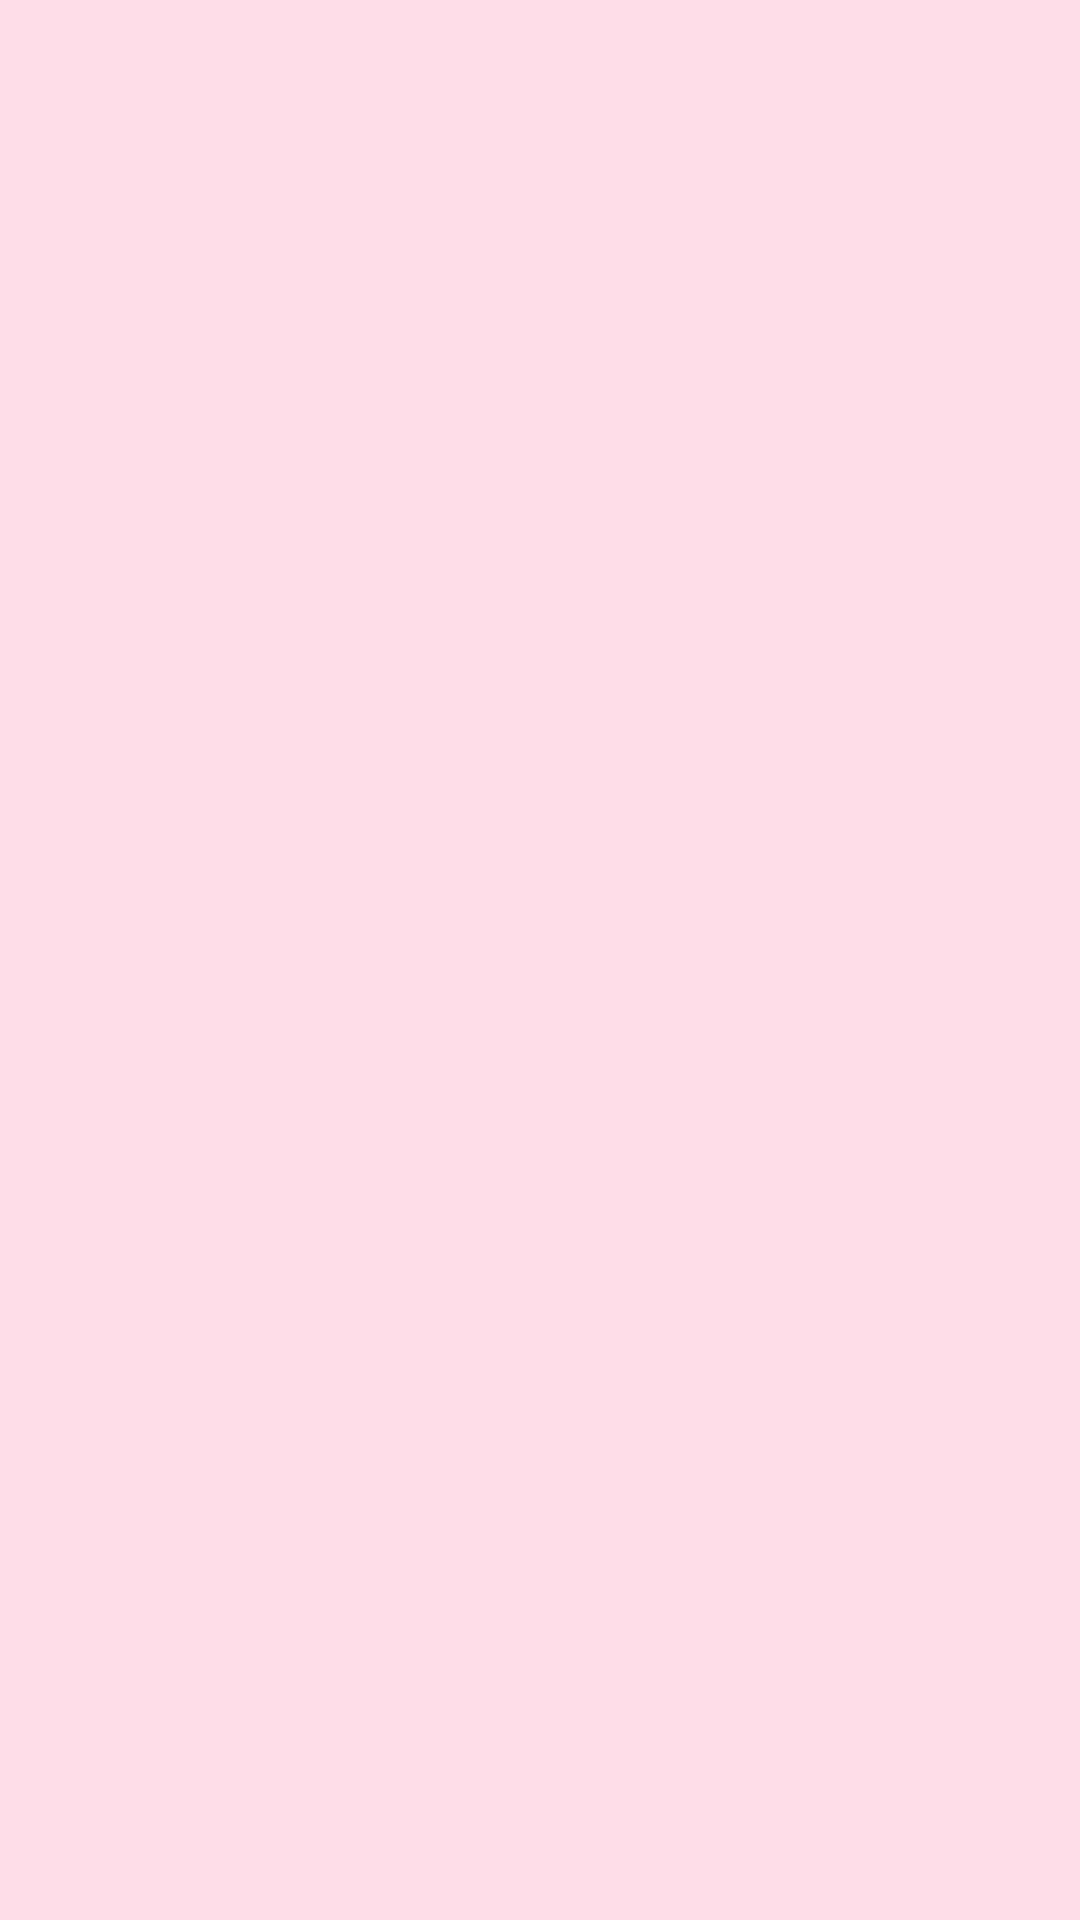 1080x1920 Pale Pink Wallpapers Top Free Pale Pink Backgrounds